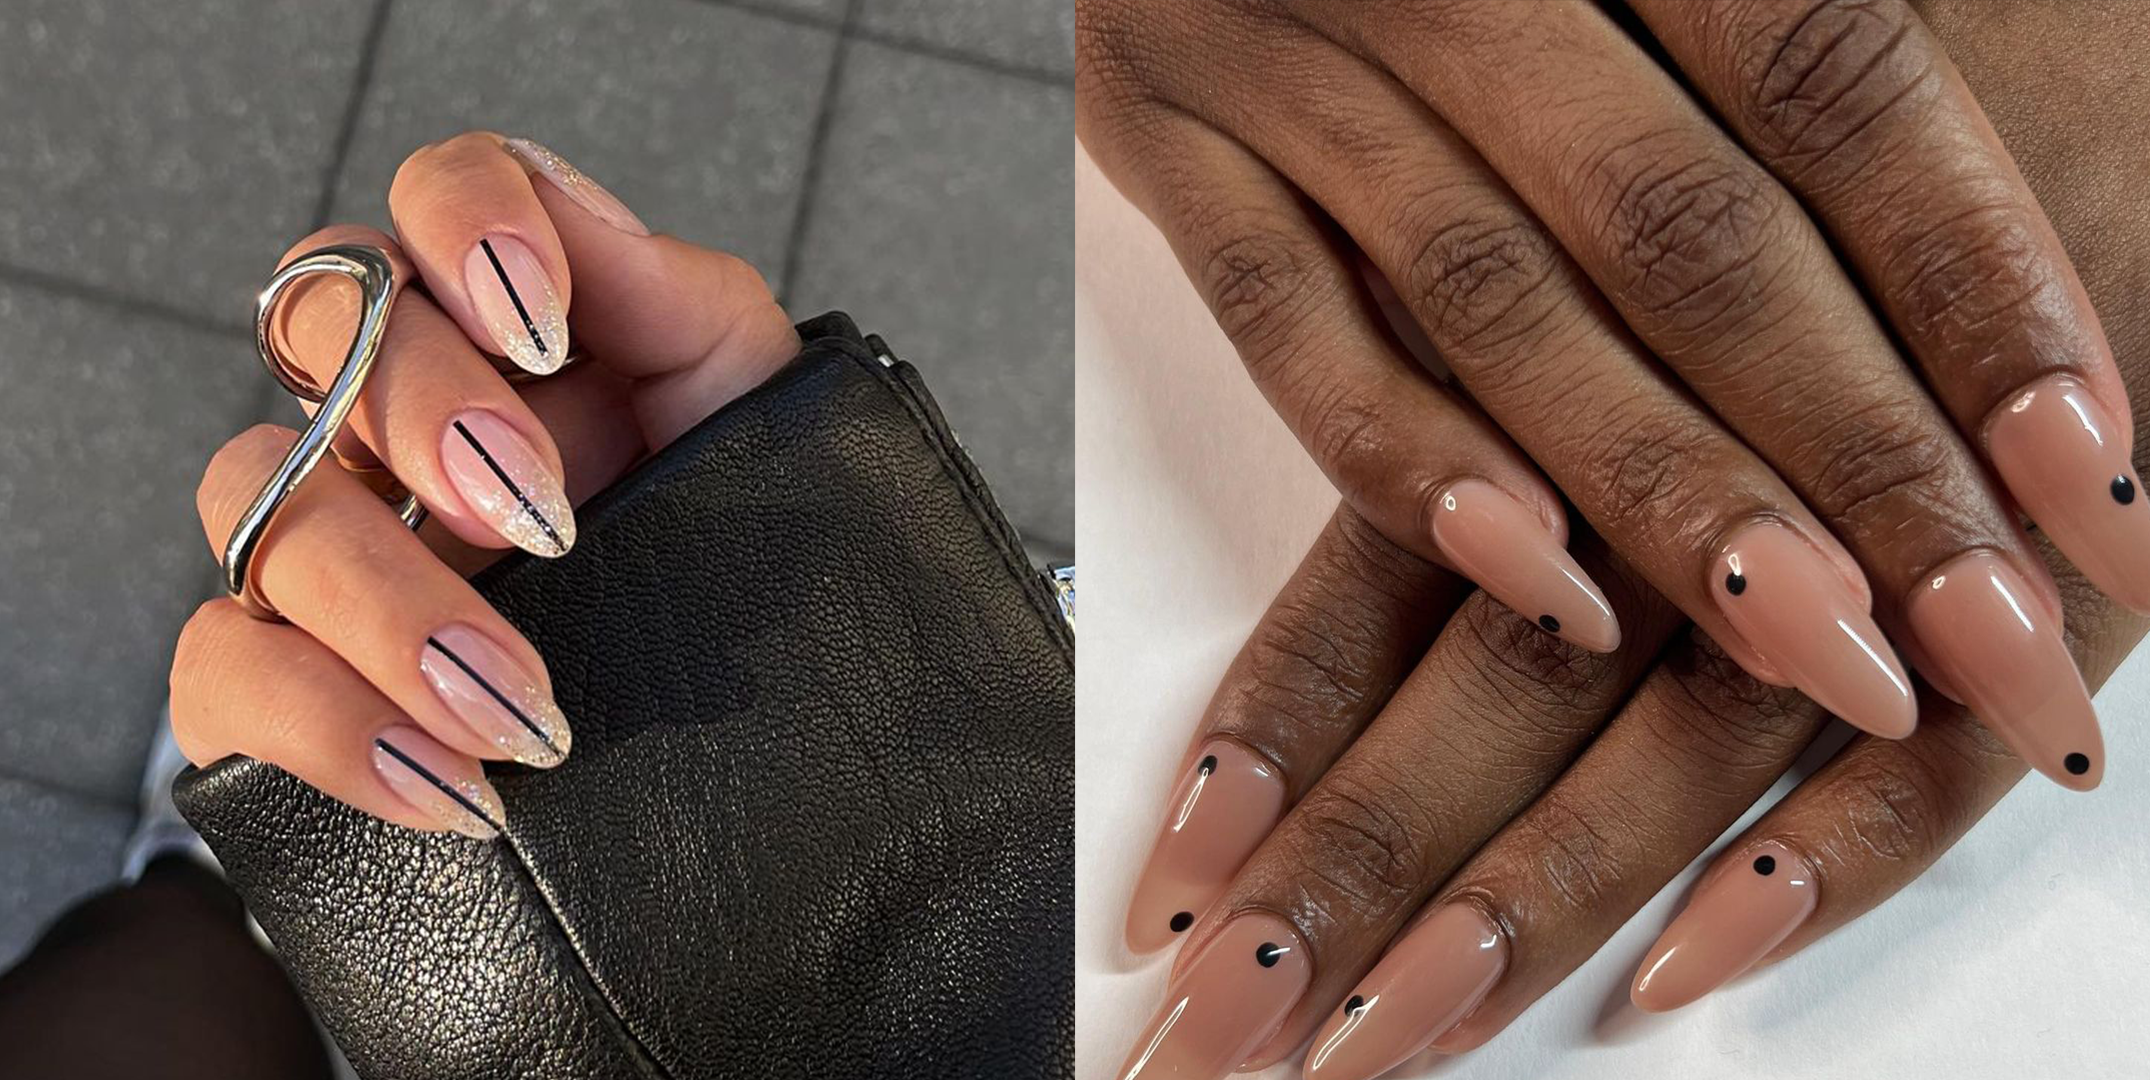 5 simple nail art techniques to master in the lockdown